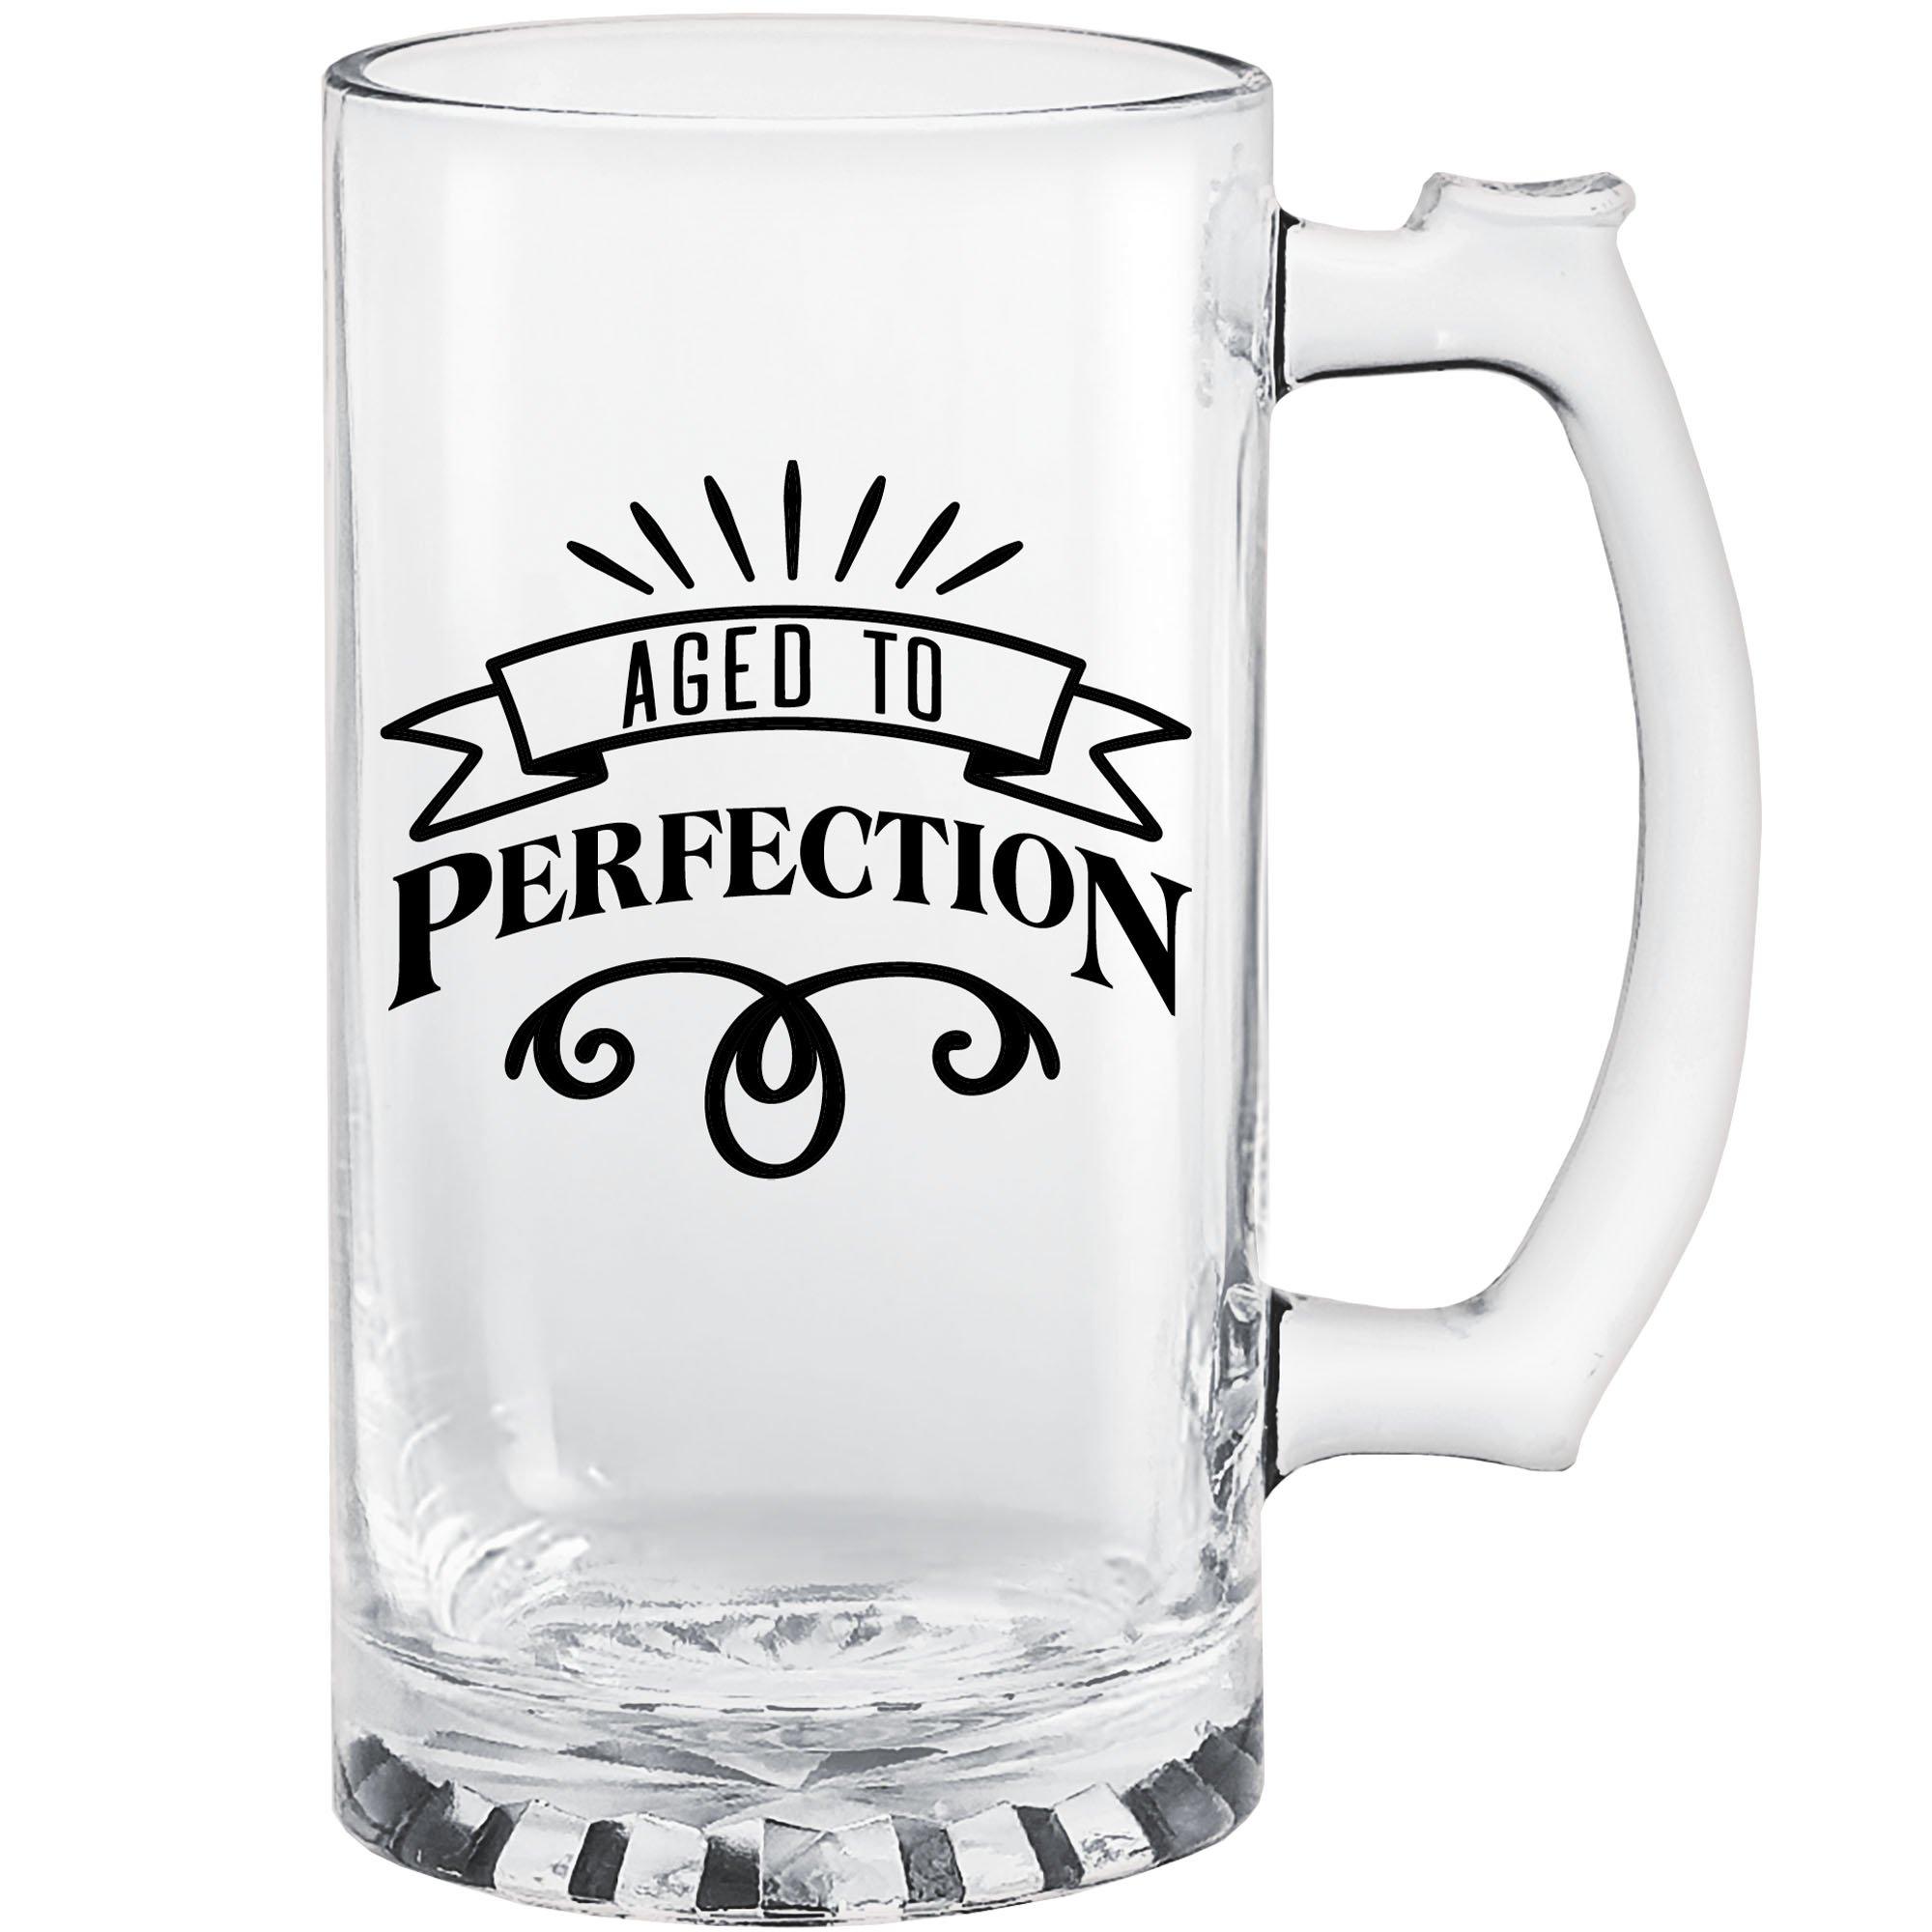 Aged to Perfection Glass Tankard, 15oz - Better With Age